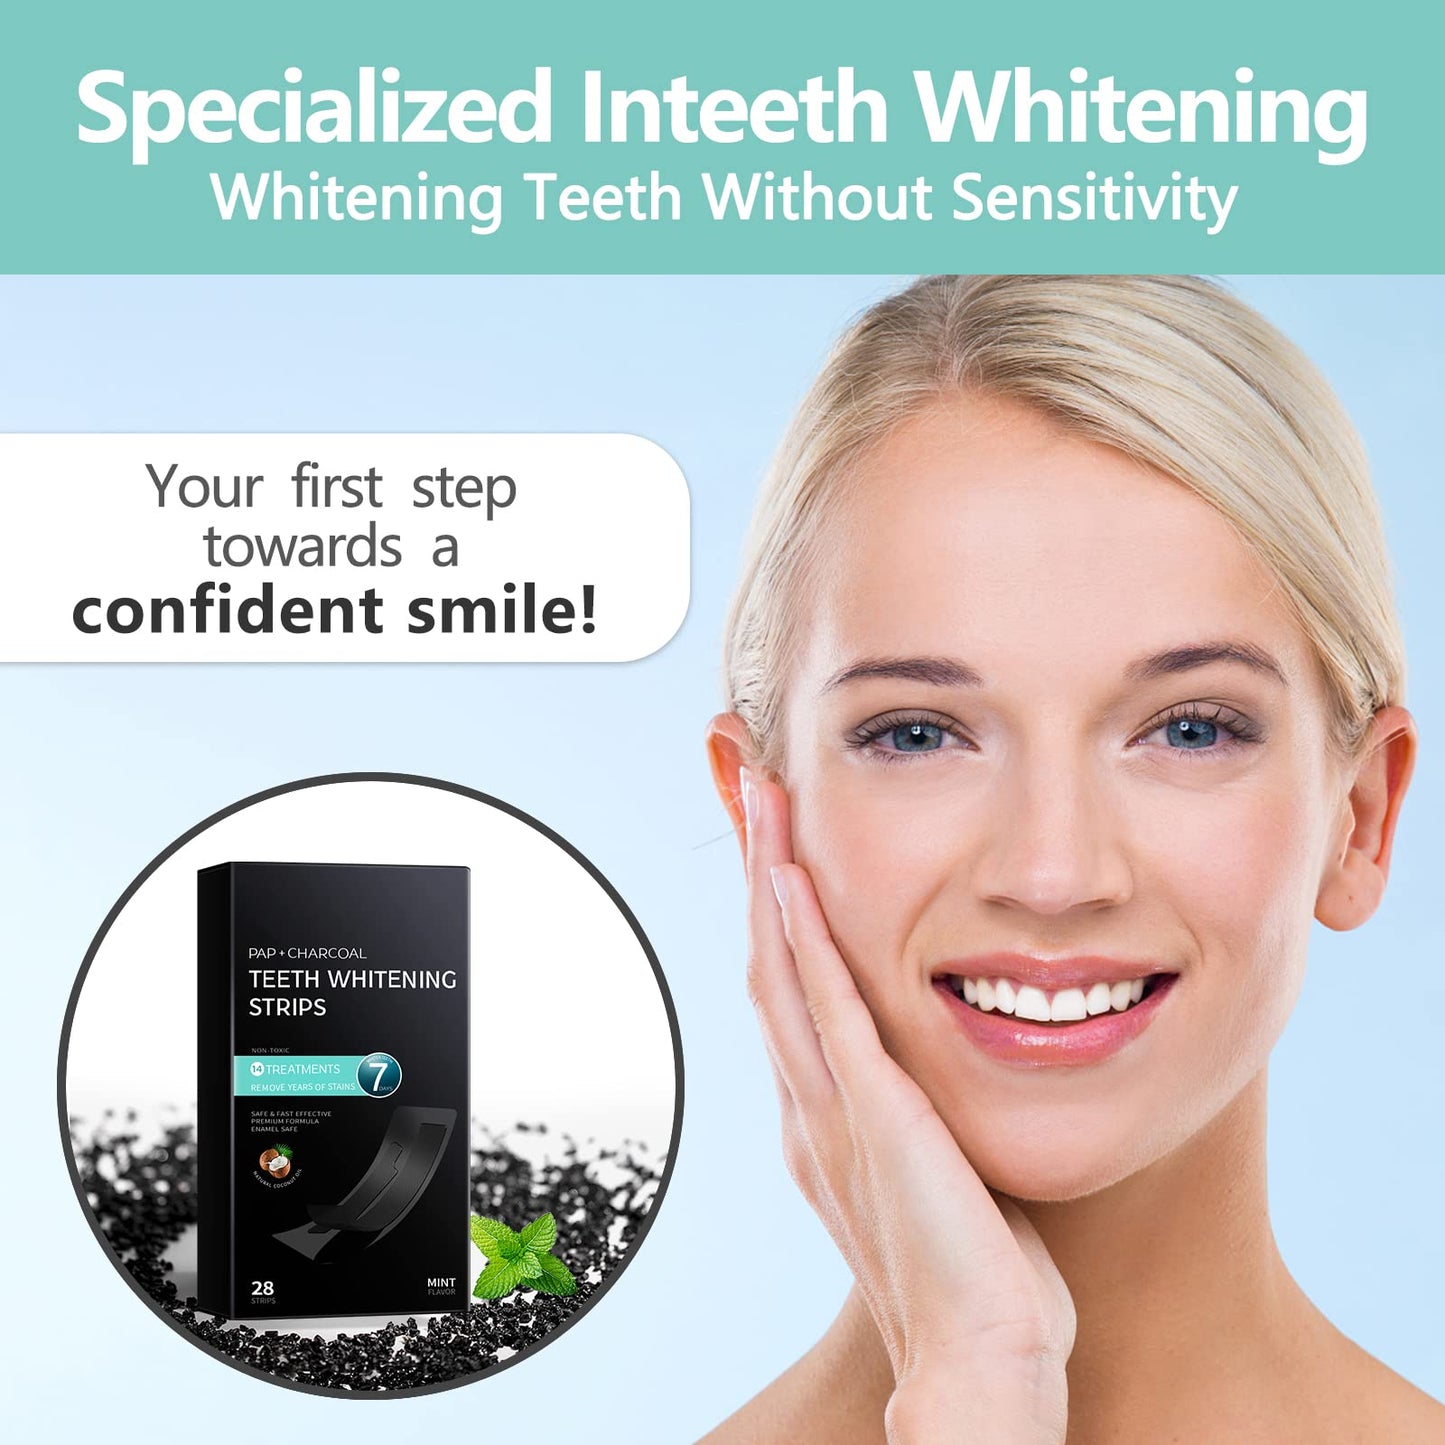 Pap+ Charcoal Teeth Whitening Strips Professional Teeth Whitening Kit for Teeth Sensitive or Coffee Drinker, 28 Tooth Whitener Strips Easy to Use 14 Treatments by ECTEST